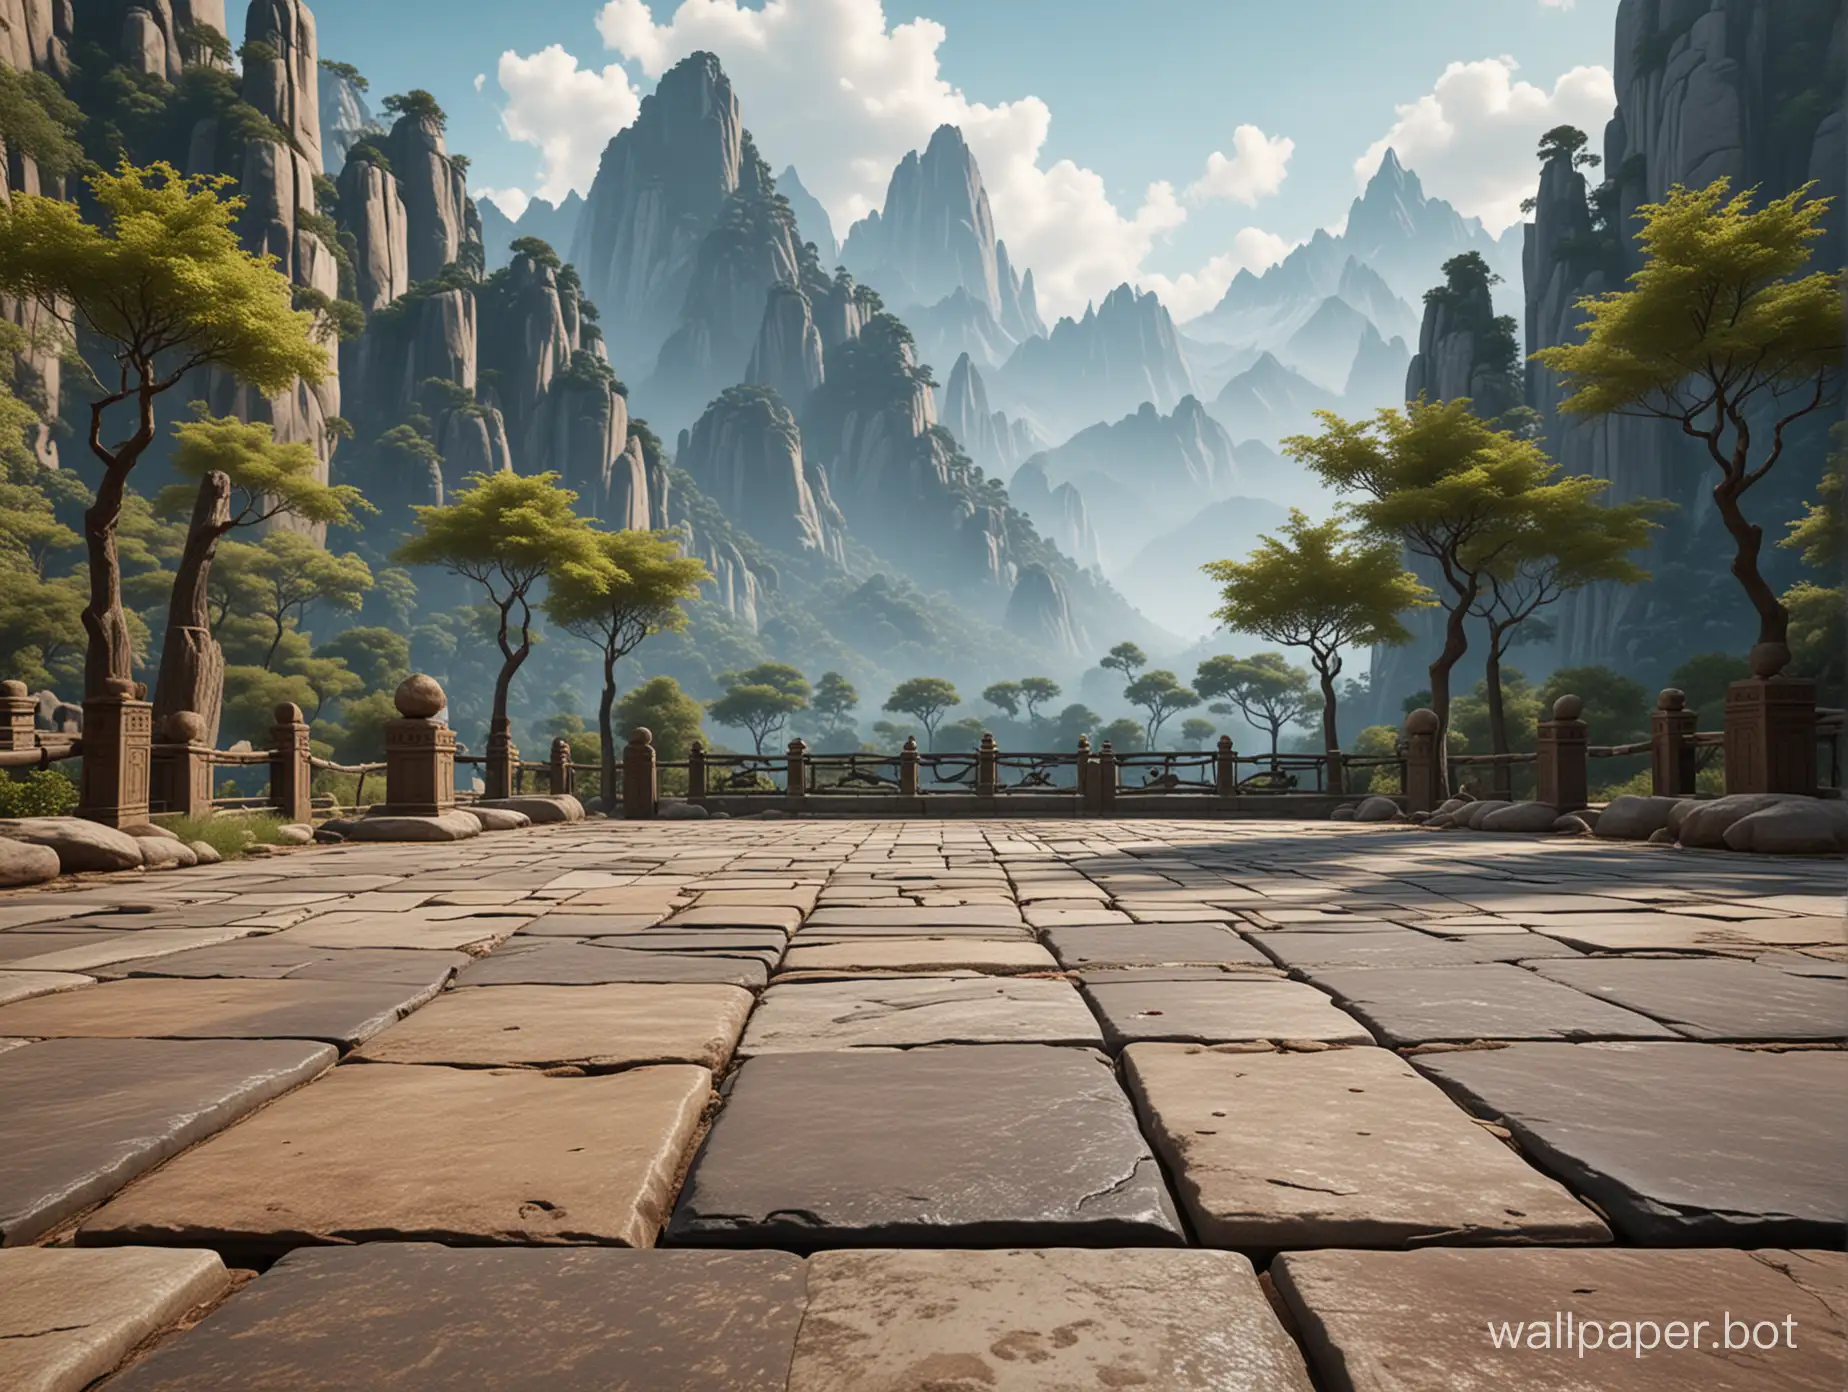 A scenery from the world of kung fu 3D movies, stone floor, camera on ground level looking at mountains in the background, realistic and highly detailed, Disney style, cinematic mood, trees on the sides.